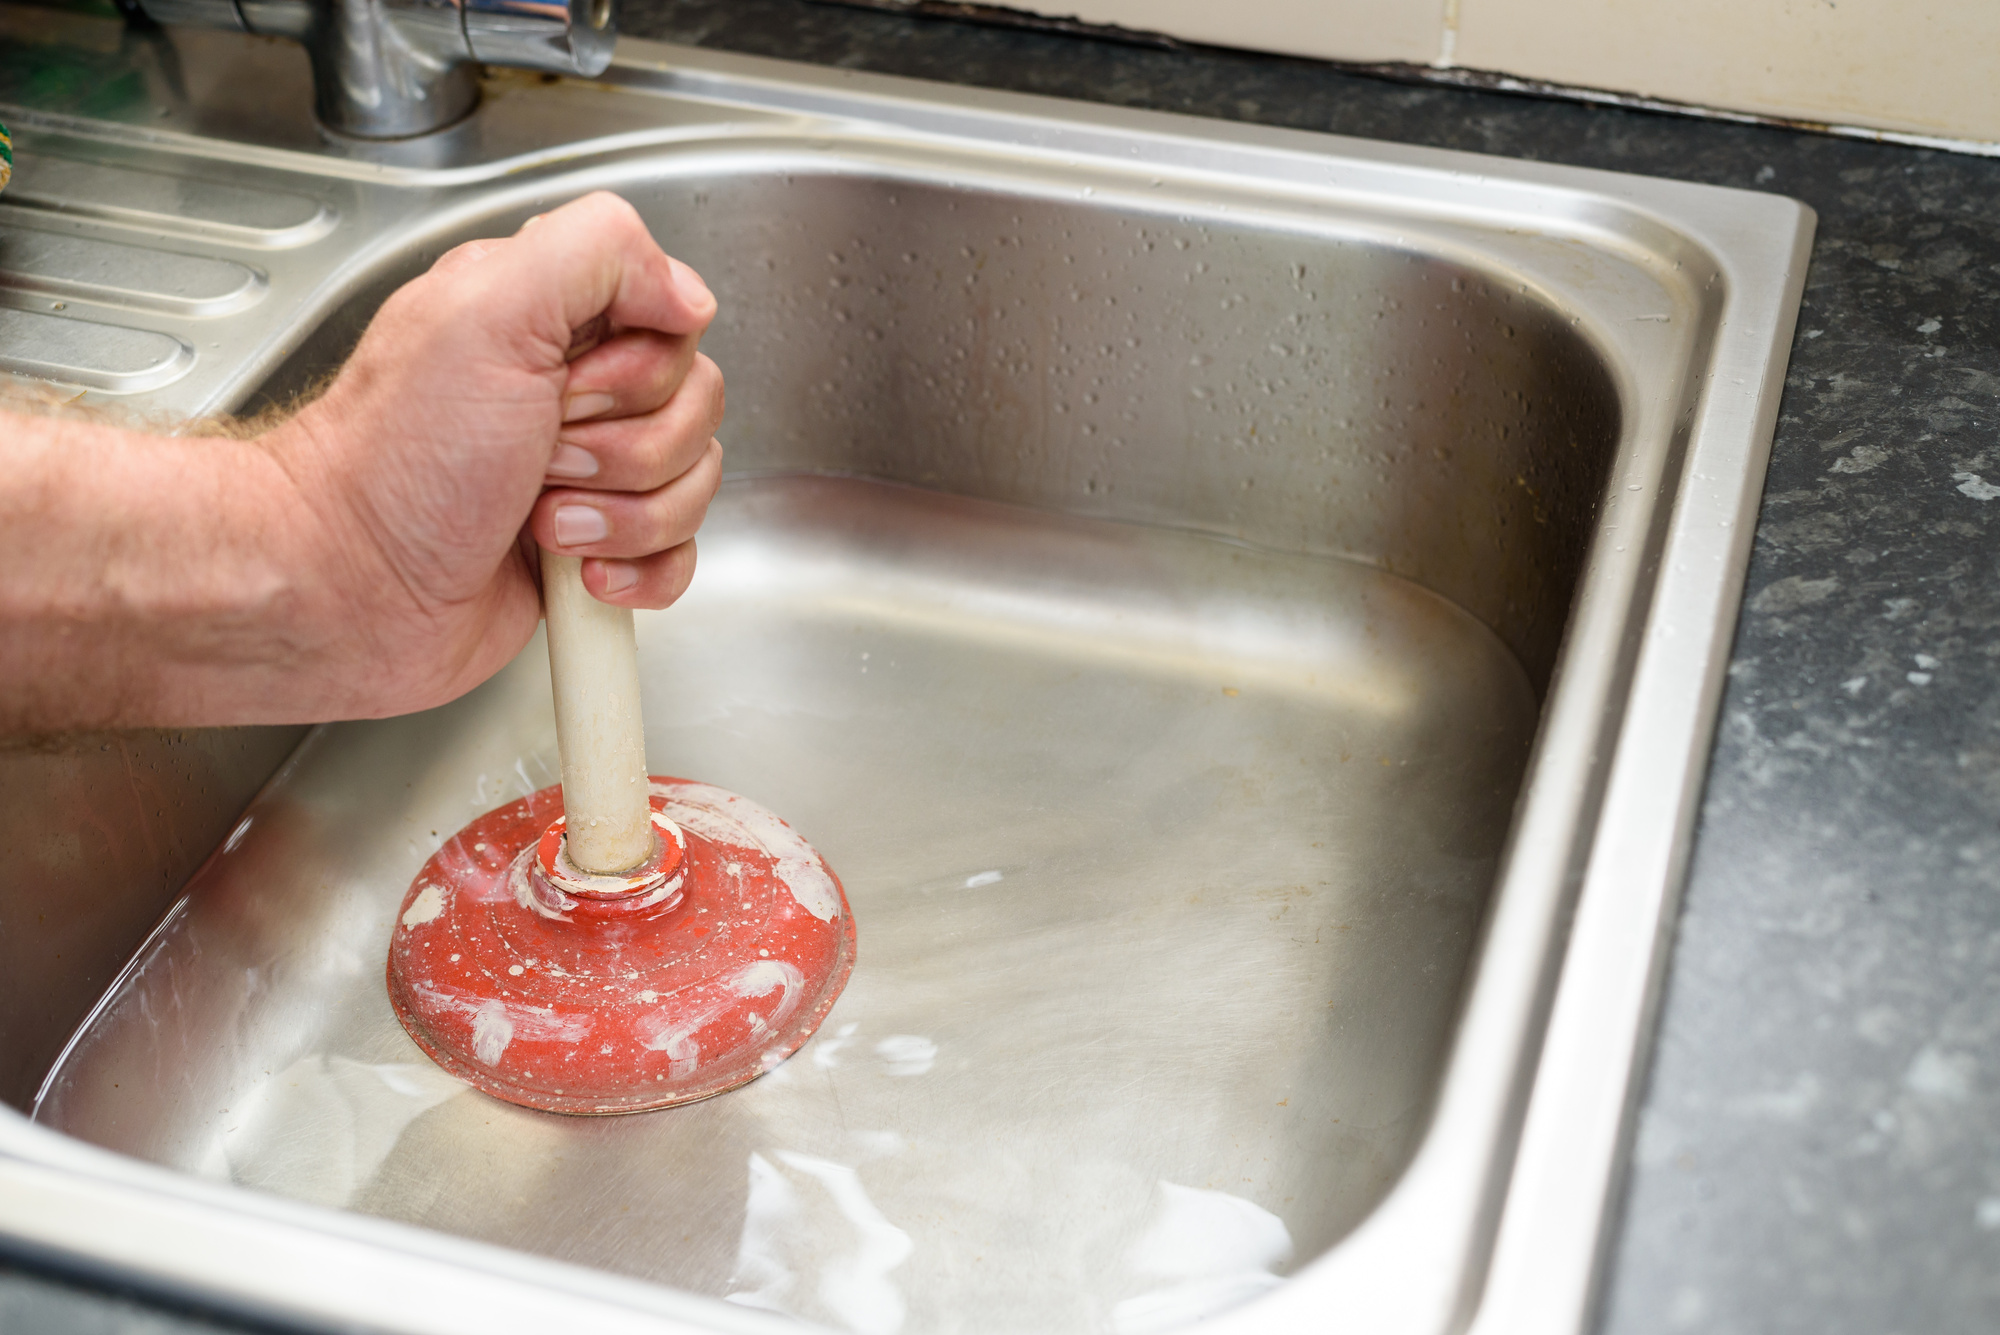 5 Things That You Should Never Put Down The Drain